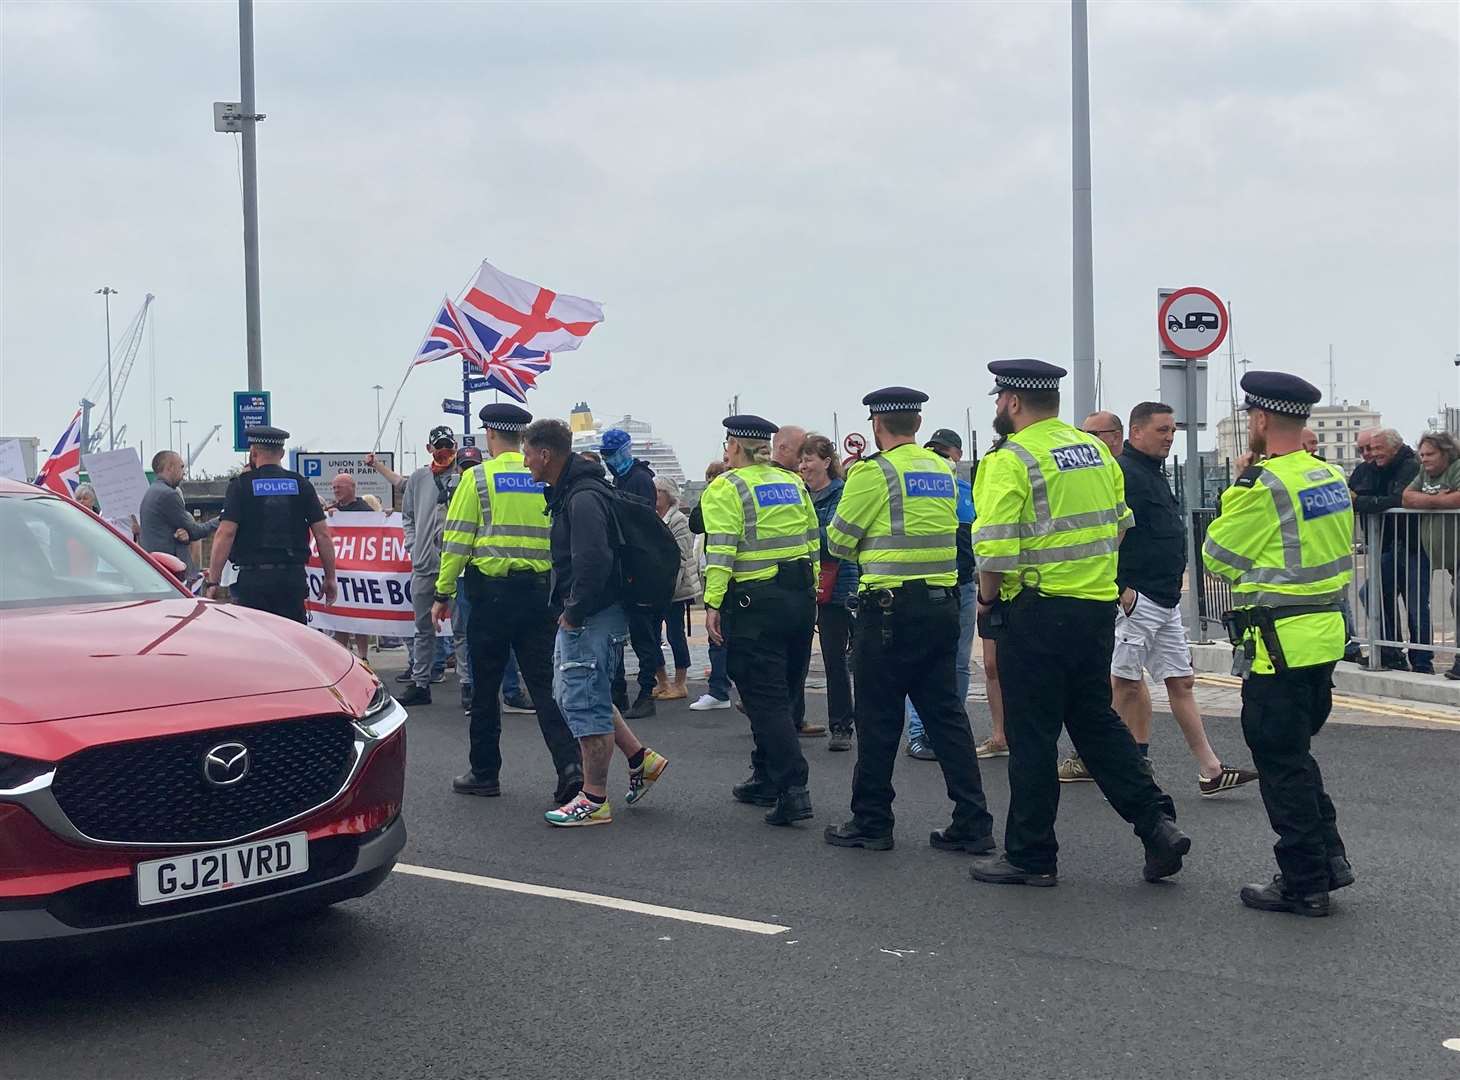 Police were in attendance at Dover marina as anti-immigration groups and counter-protesters went head-to-head